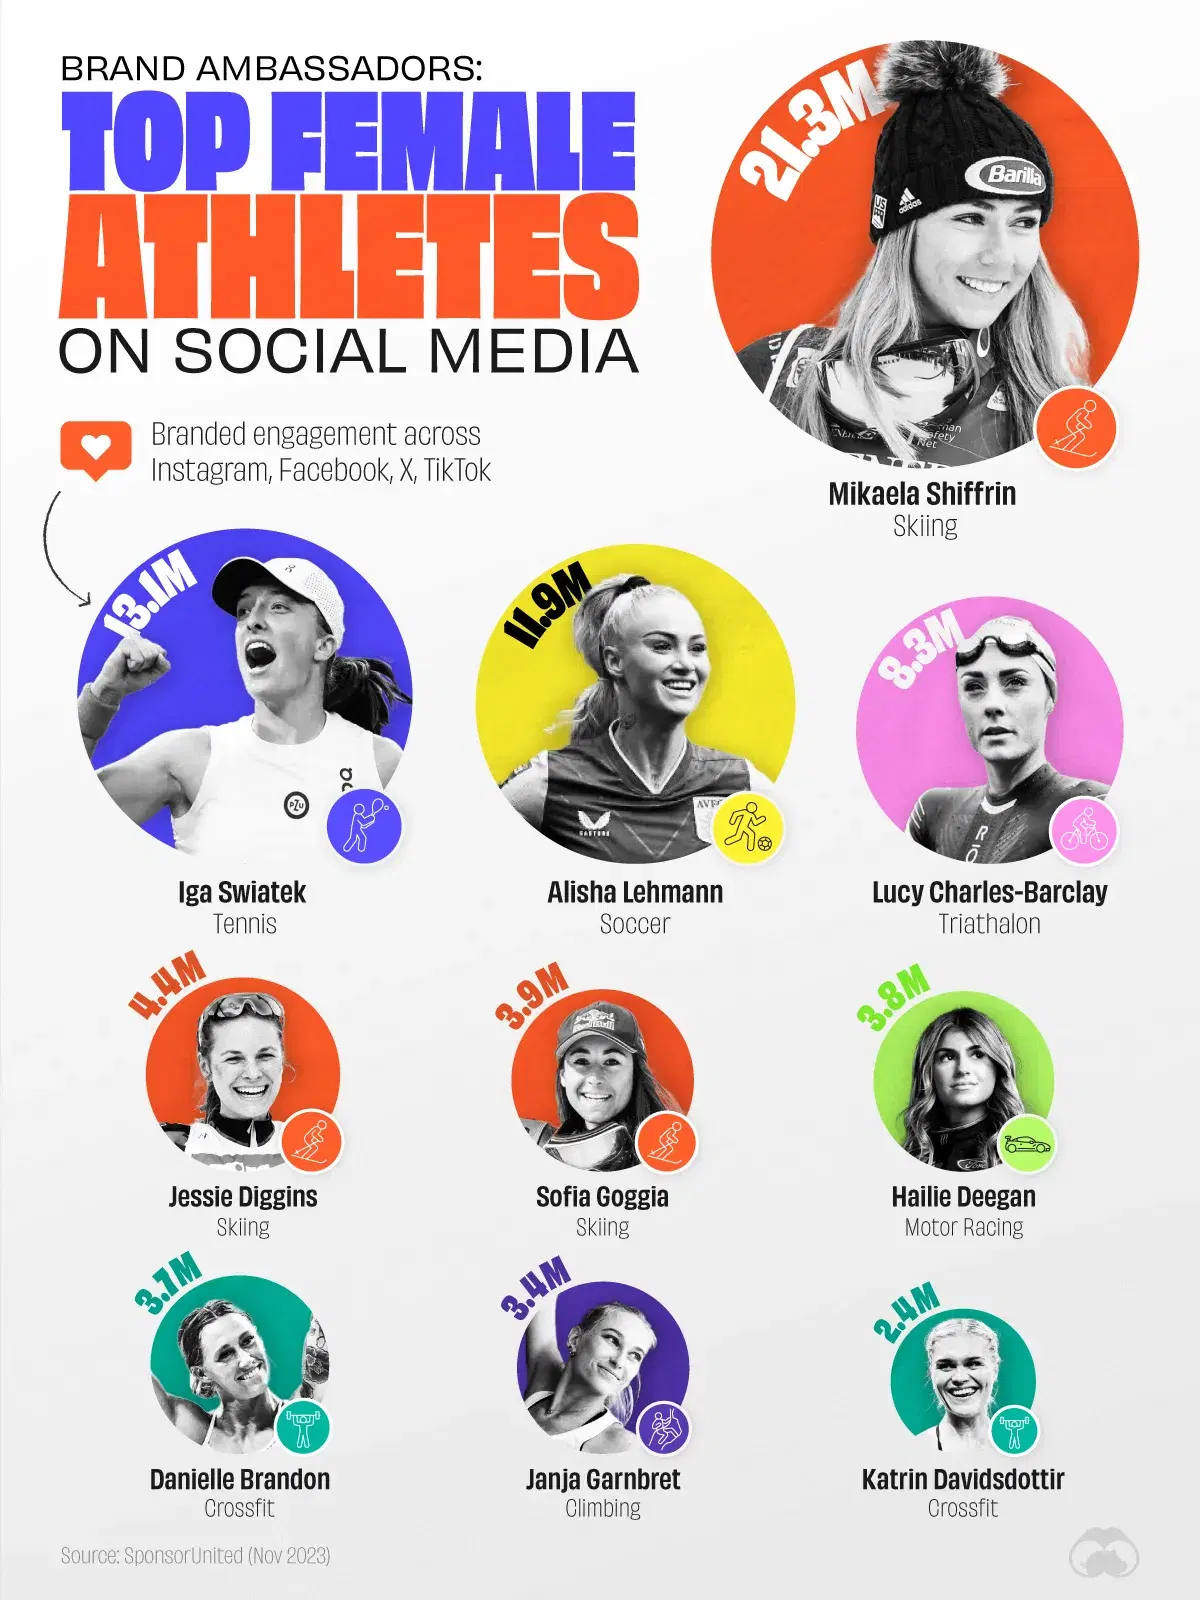 Top Female Athletes, by Branded Engagement on Social Media